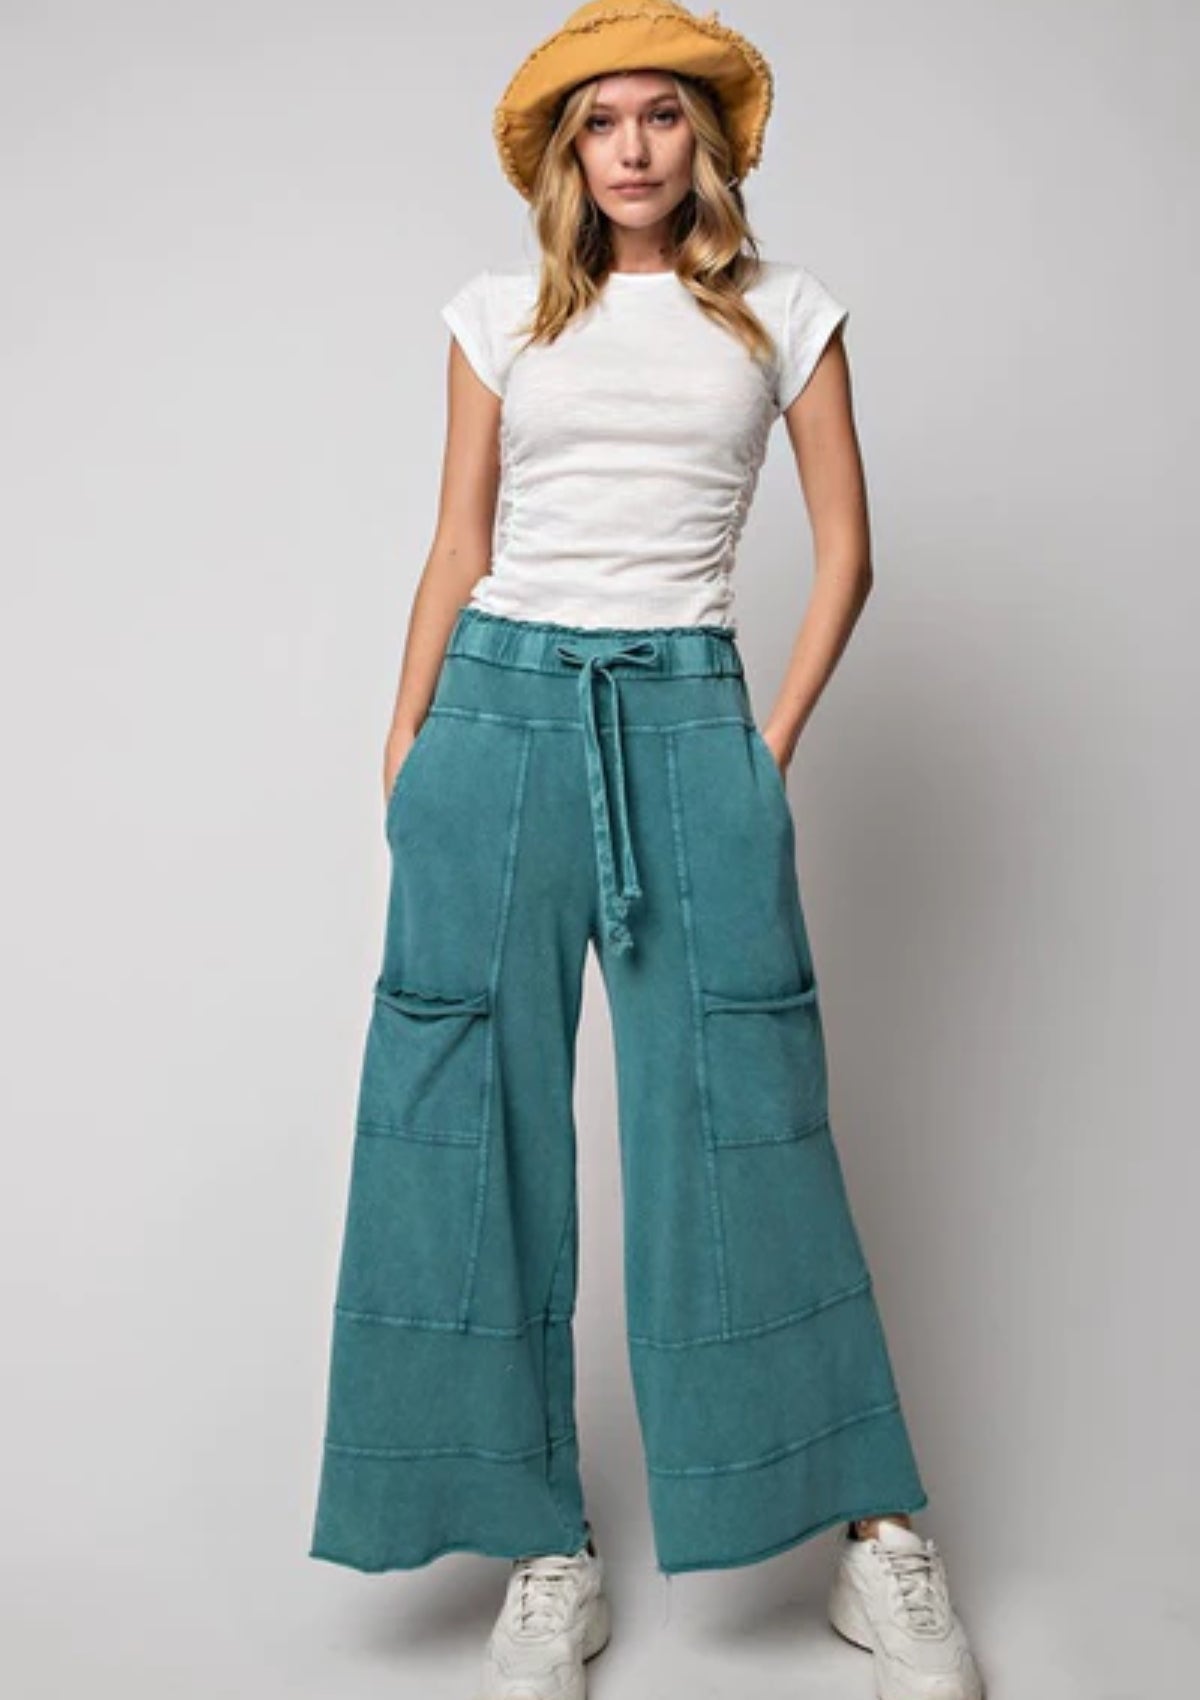 Mineral Washed Terry Knit Pants -Estelle- Ruby Jane-